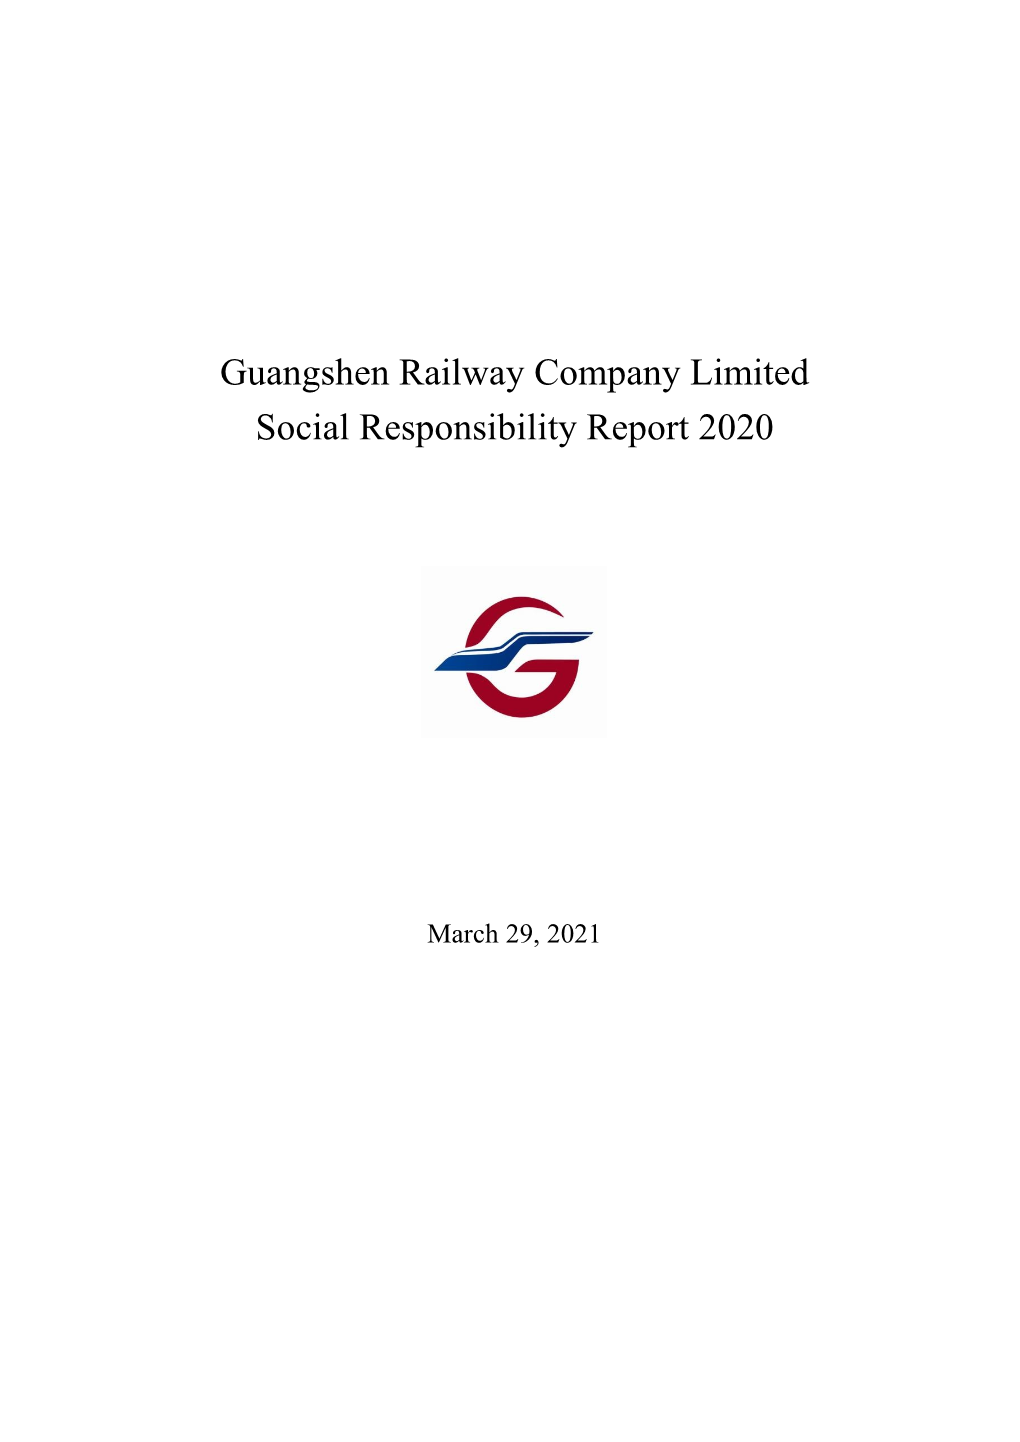 Guangshen Railway Company Limited Social Responsibility Report 2020